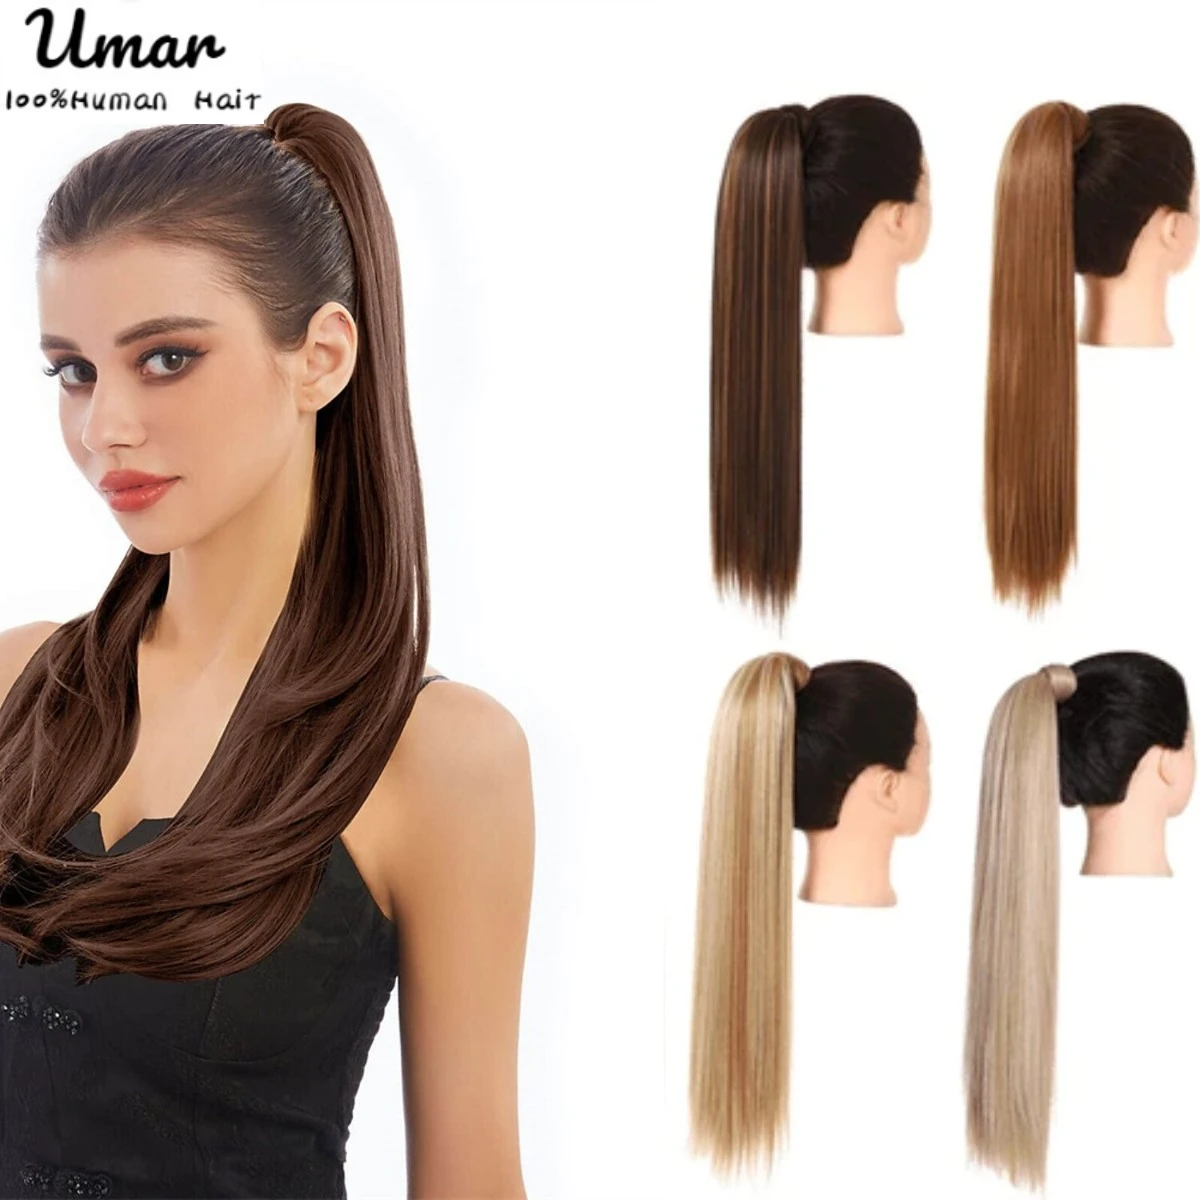 

Ponytail Hair Extensions Wrap Around Hairpieces For Women Clip in Remy Hair Extensions Natural Straight Human Hair Ponytail